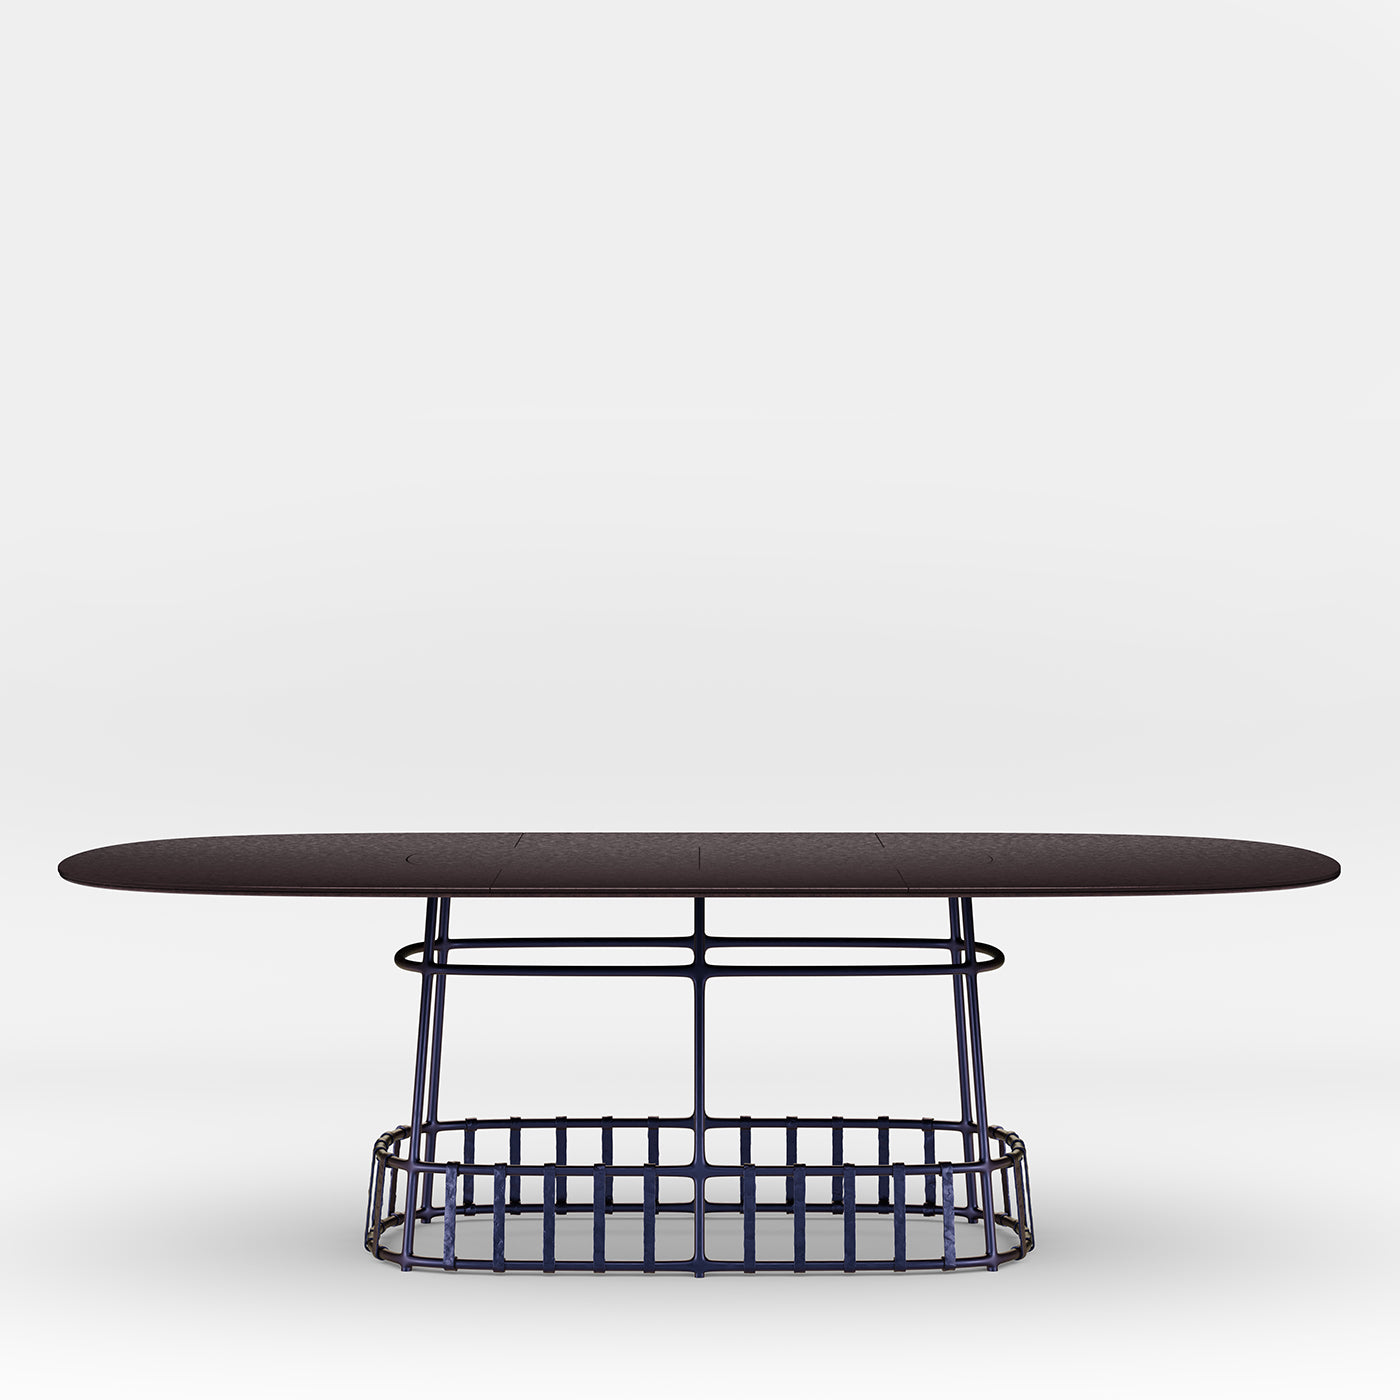 Dolmen Oval Dining Table by Margherita Rui - Alternative view 2